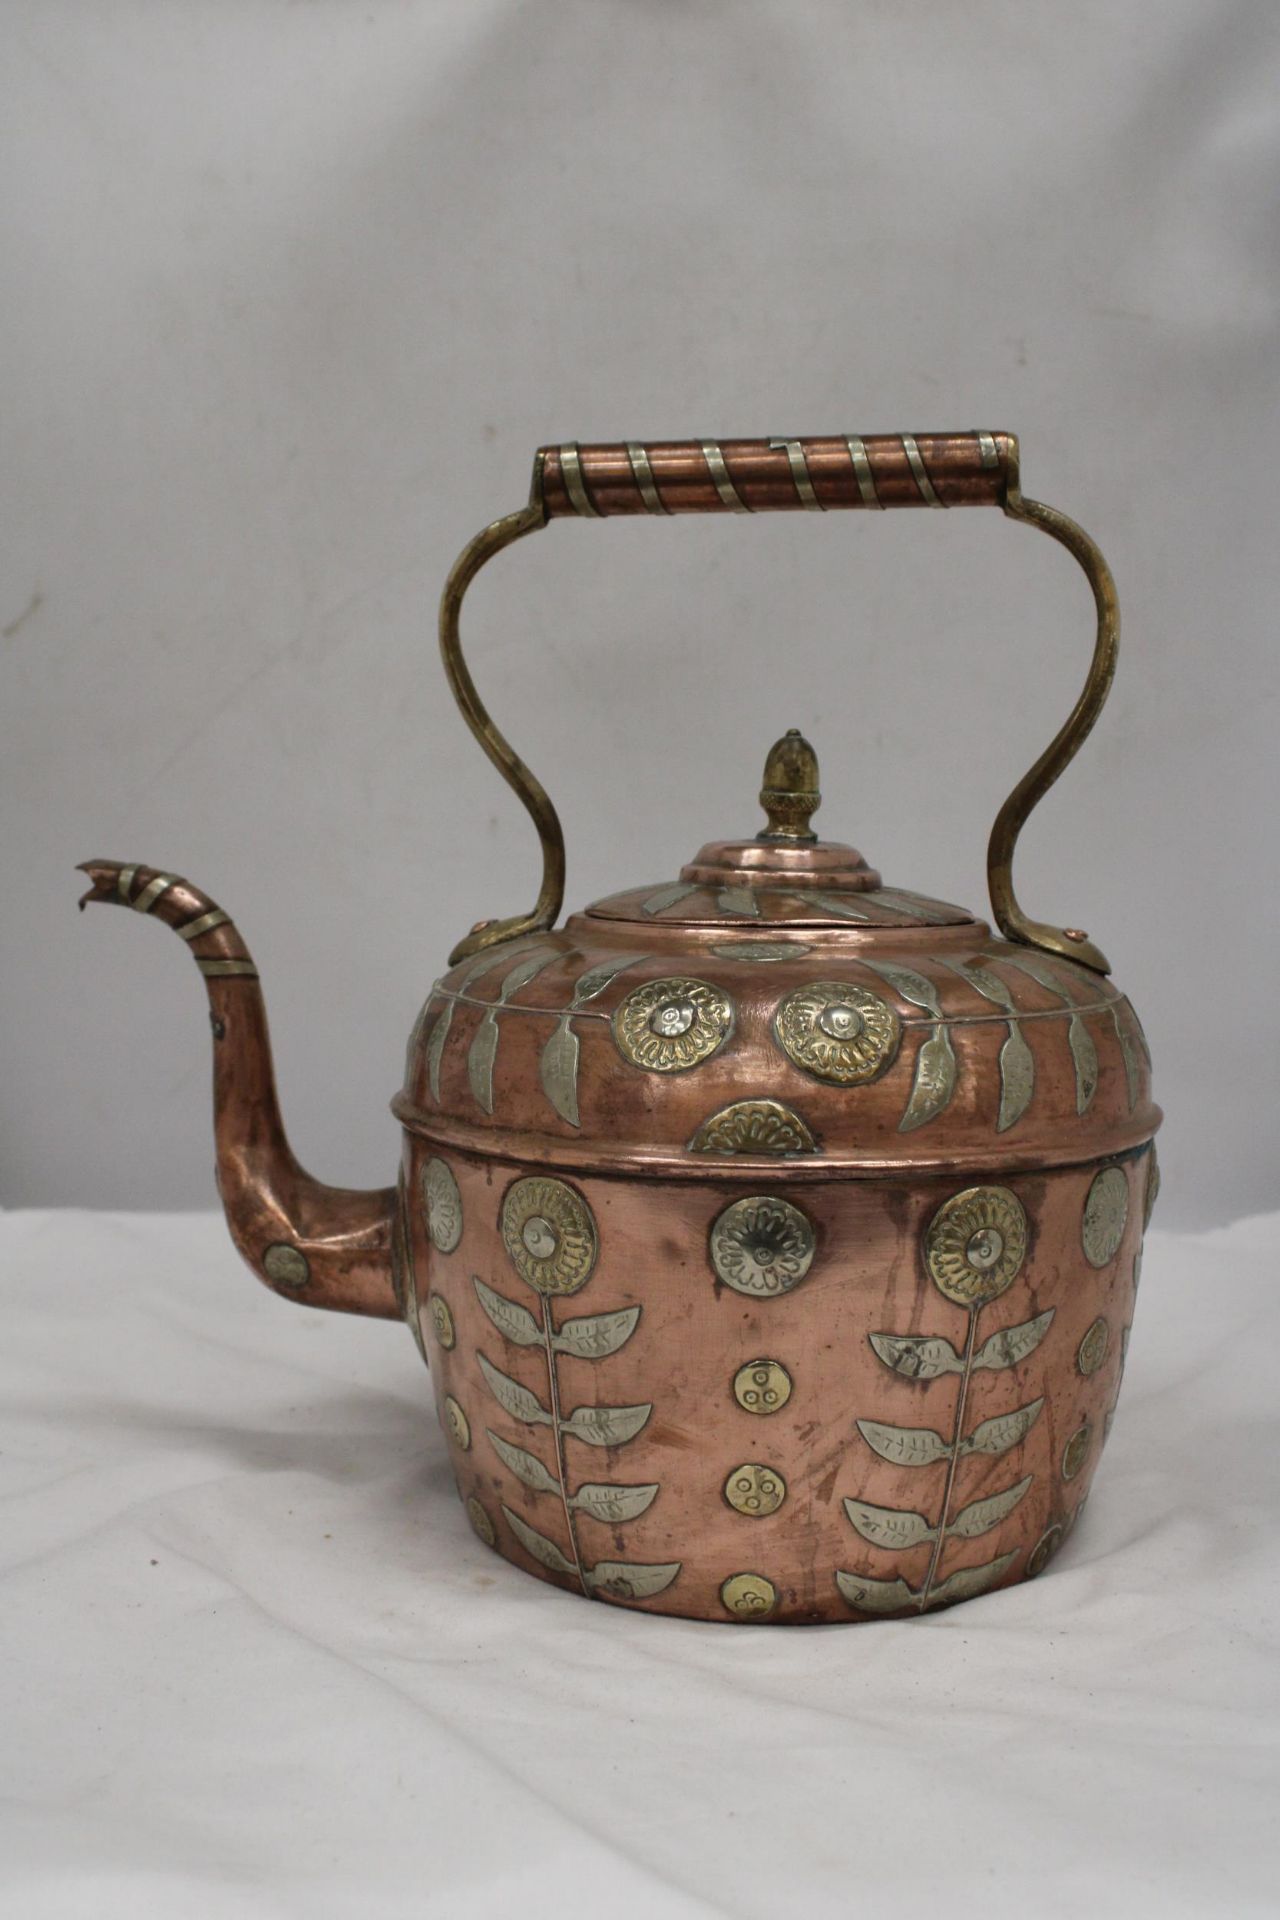 A 1900'S VICTORIAN COPPER KETTLE WITH BRASS FLORAL DETAIL - Image 2 of 5